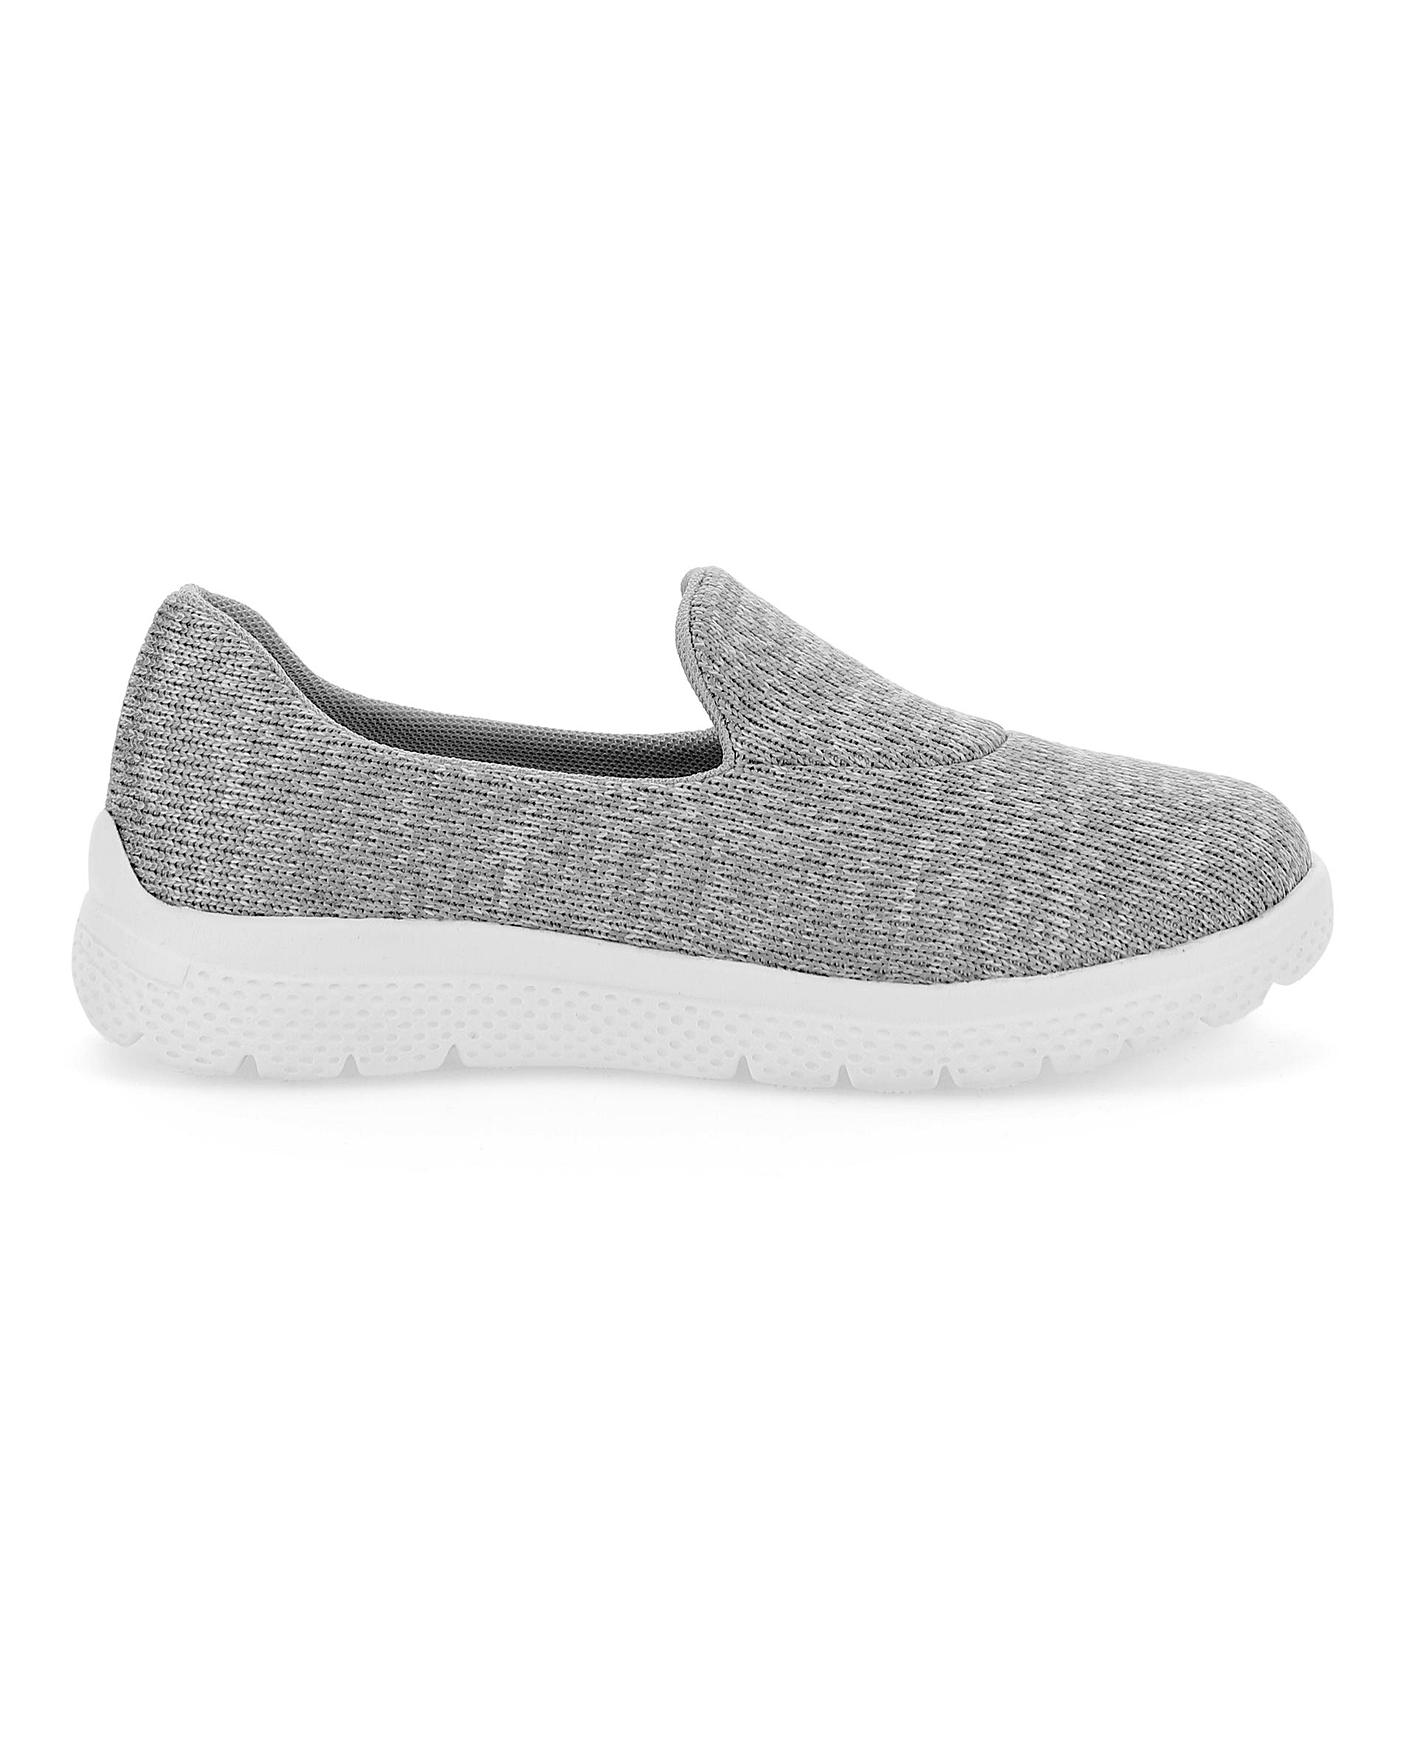 Cushion Walk Leisure Shoes EEE Fit 